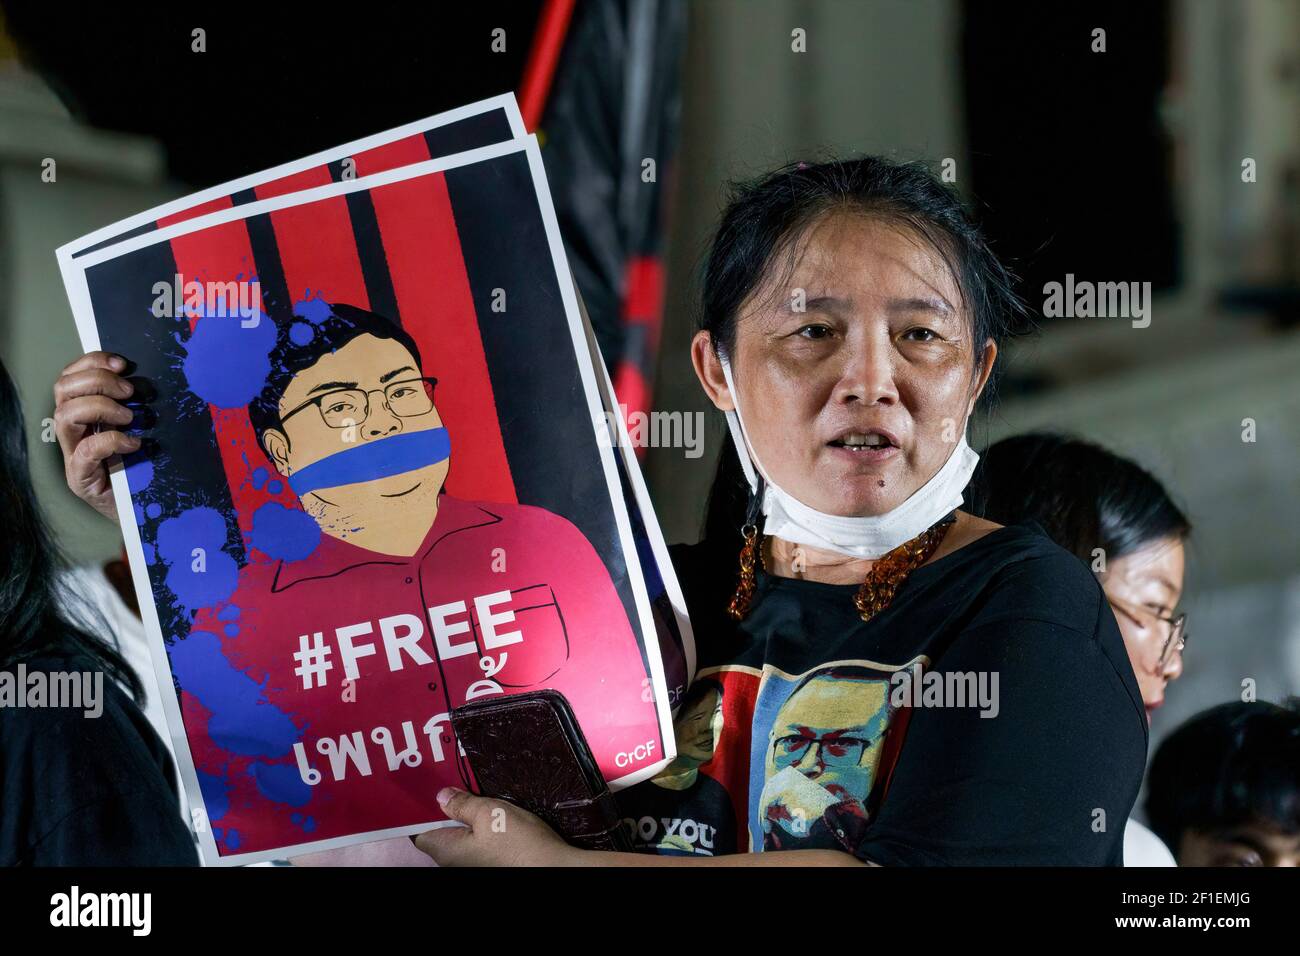 Sureerat Chiwarak holding a portrait of her son, Parit 'Penguin' Chivarak, during the demonstration. A group of protestors led by Jatupat 'Pai' Boonpattararaksa, one of the Thai pro-democracy leaders arrives at the Democracy monument while protesting against the imprisonment of 4 pro-democracy activists (Somyot Pruksakasemsuk, Patiwat Saraiyam, Parit 'Penguin' Chivarak, and Anon Nampa) who were arrested under the lese majeste law (Article 112 of the Thai criminal code) and demand the reform of the monarchy and abolition of the lese-majesty law. Stock Photo